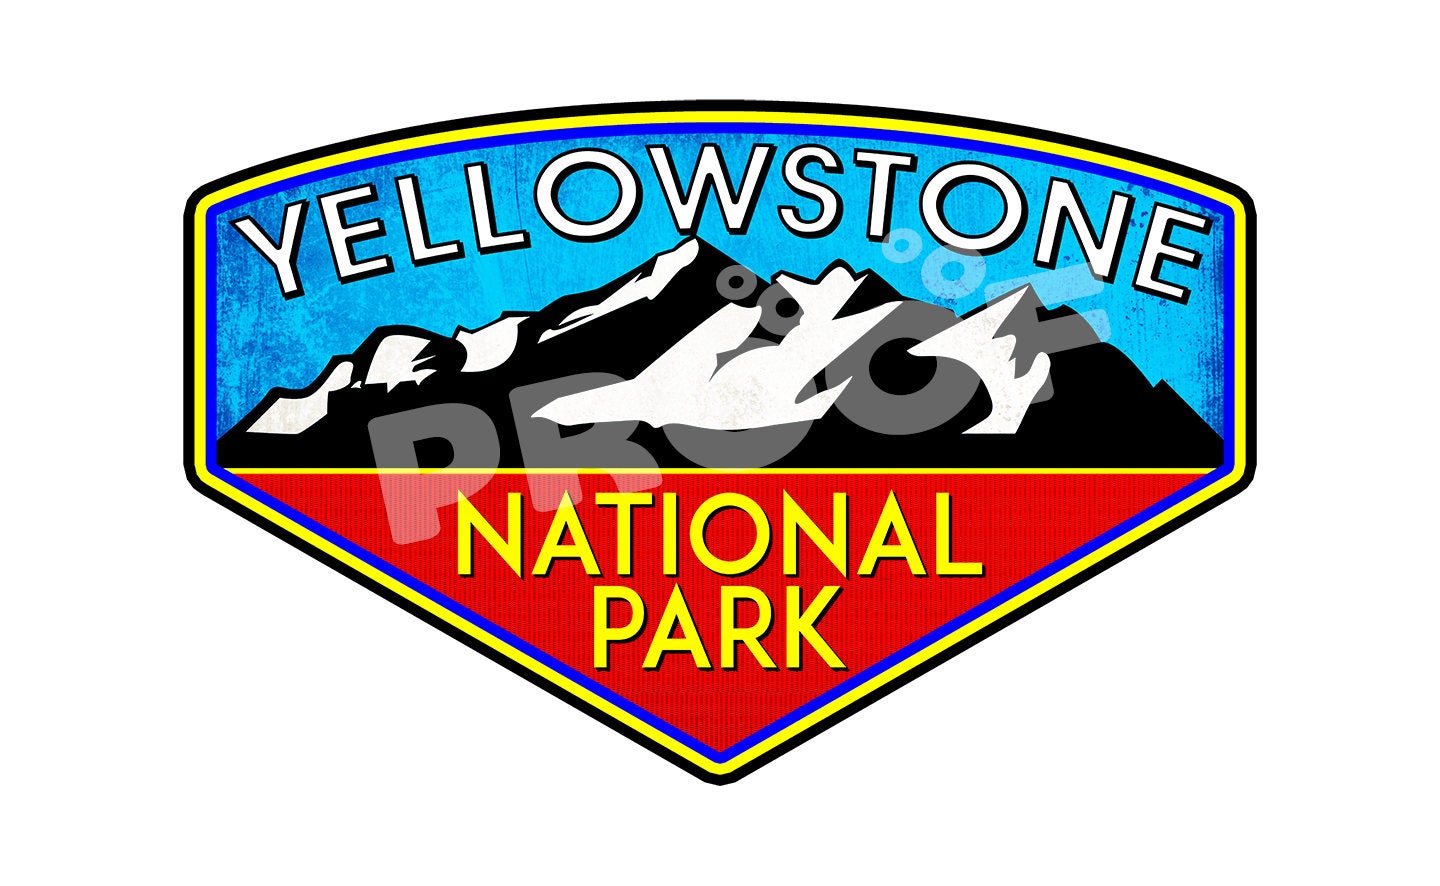 Yellowstone National Park Wyoming Sticker Decal  Explore Nature Outdoors Hiking Camping